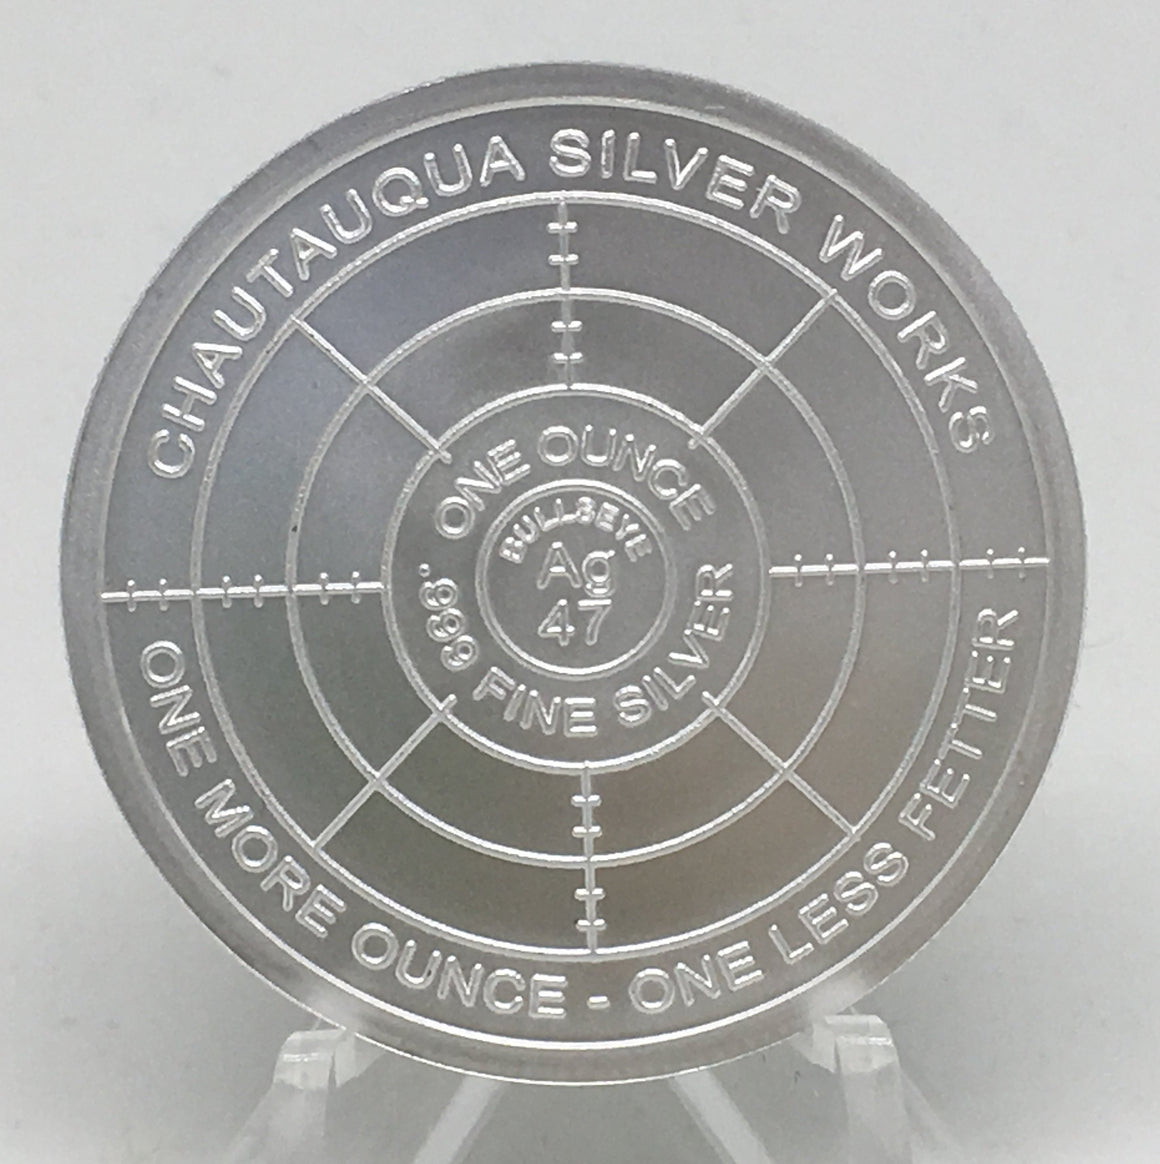 Cryptic Silver Series #8 - Cryptic Fire, BU Finish by Chautauqua Silver Works, 1oz .999 Silver Round.